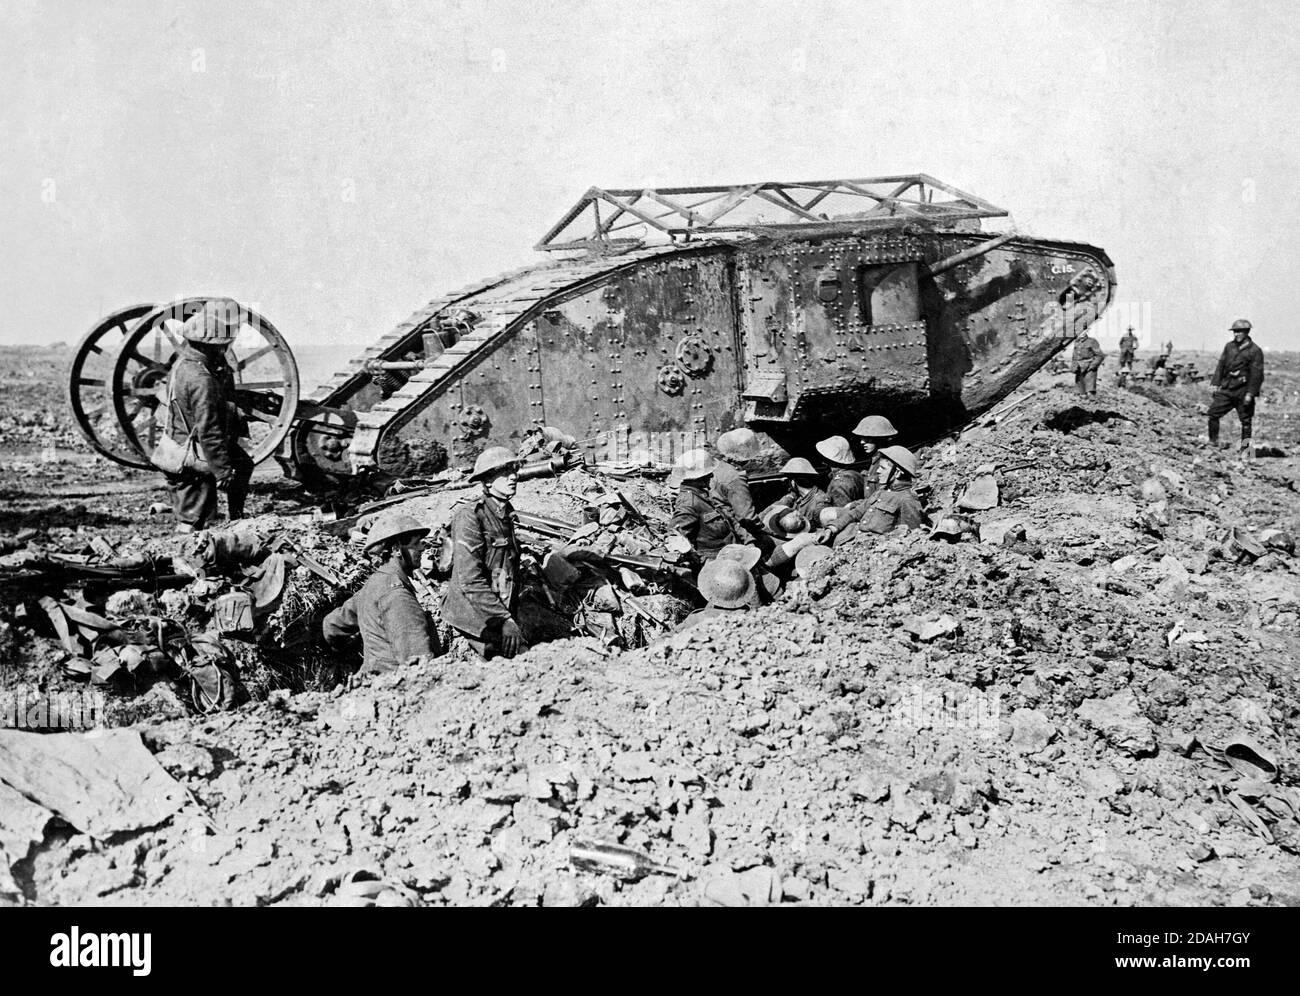 An early model British Mark I 'male' tank, named C-15, near Thiepval, 25 September 1916. The tank is probably in reserve for the Battle of Thiepval Ridge which began on 26 September. The tank is fitted with the wire 'grenade shield' and steering tail, both features discarded in the next models. Stock Photo